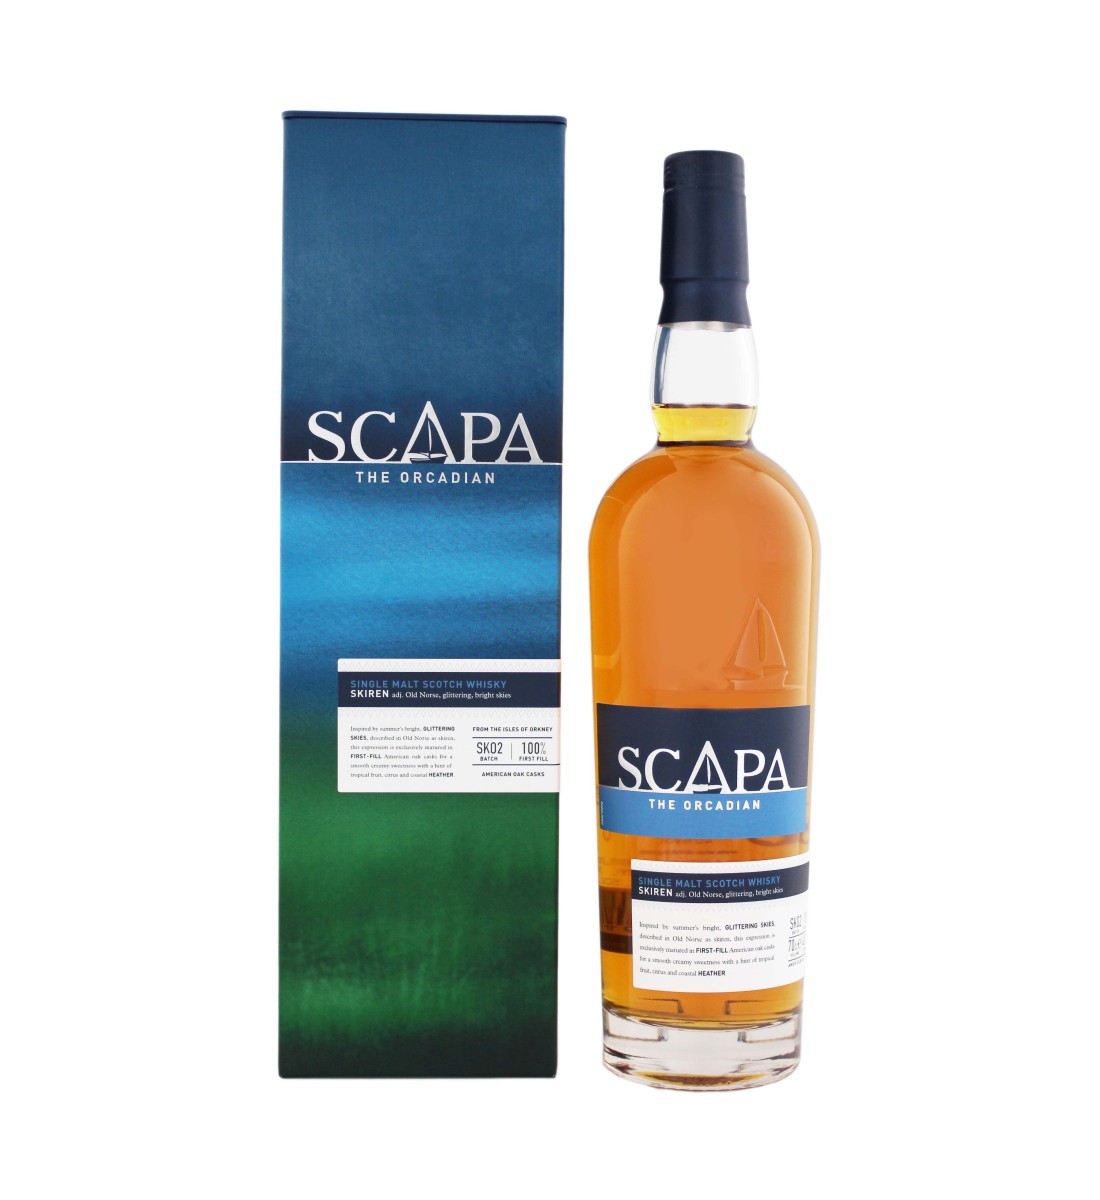 Whisky Scapa The Orcadian Skiren 0.7L 0.7L